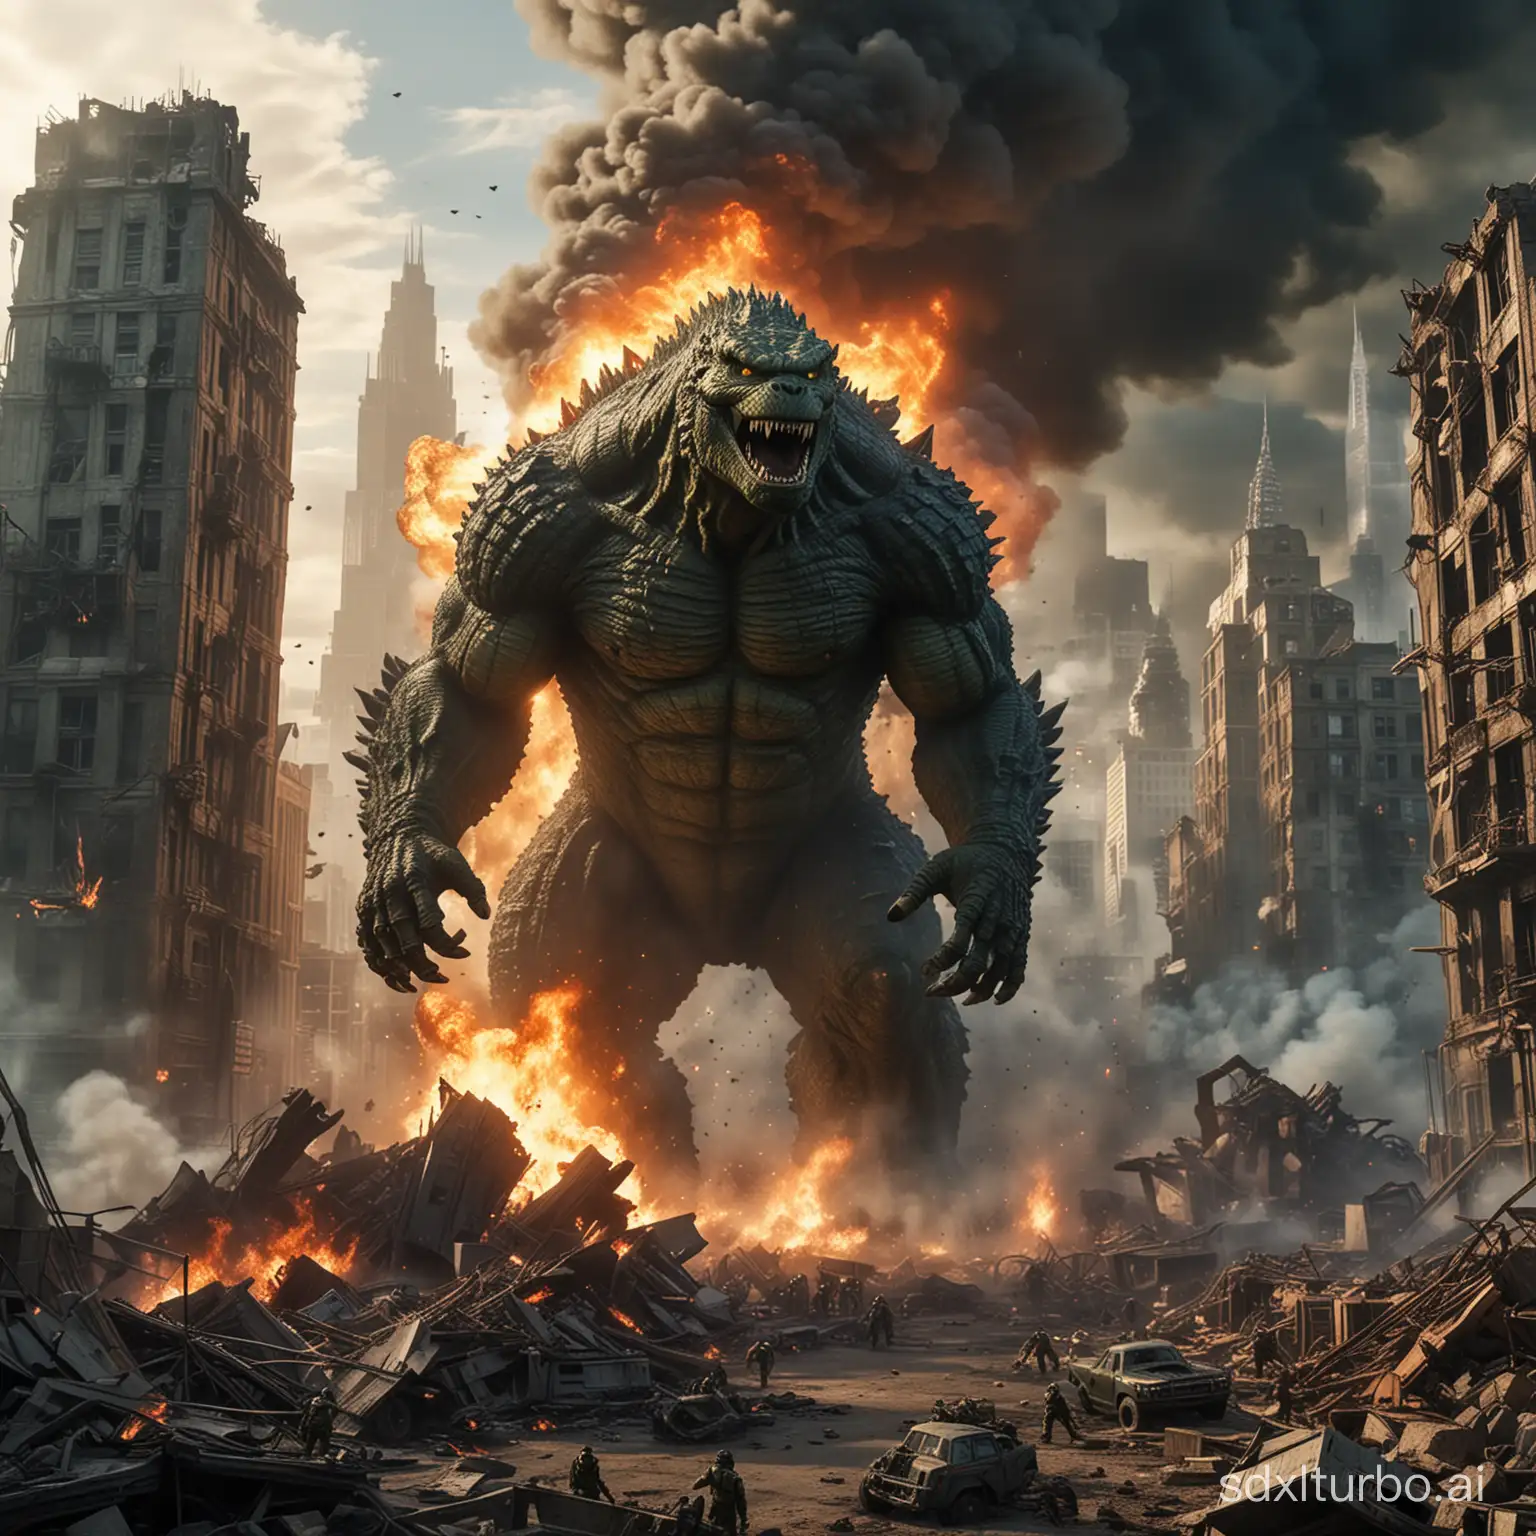 In the future city, a scene of ruins prevails, with buildings toppling and leaning chaotically. Smoke and flames rise everywhere as Godzilla battles Hulk in a fierce confrontation